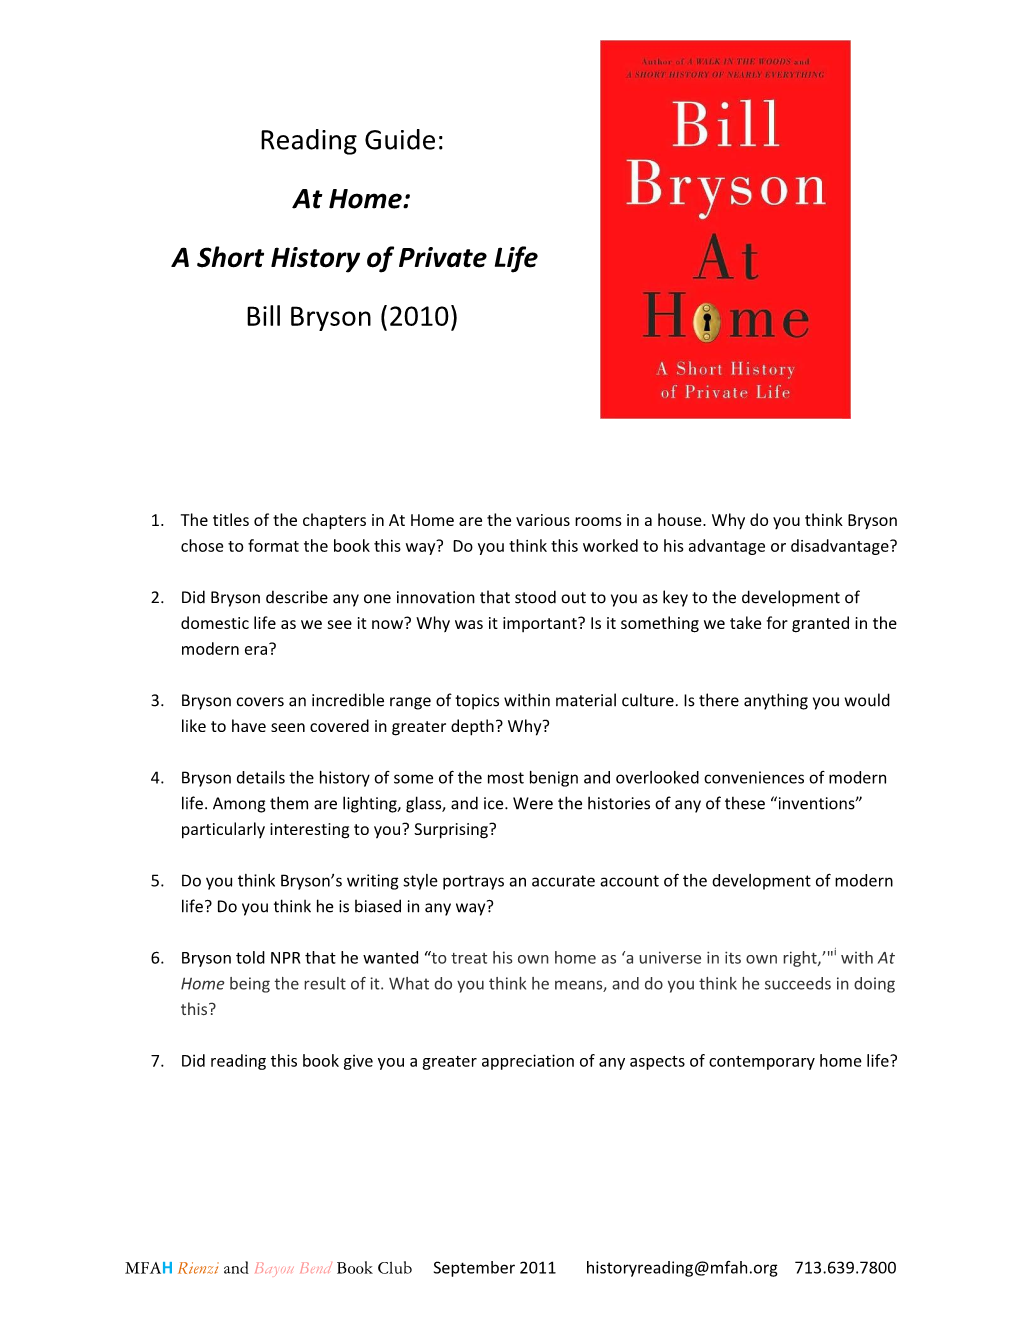 Reading Guide: at Home: a Short History of Private Life Bill Bryson (2010)